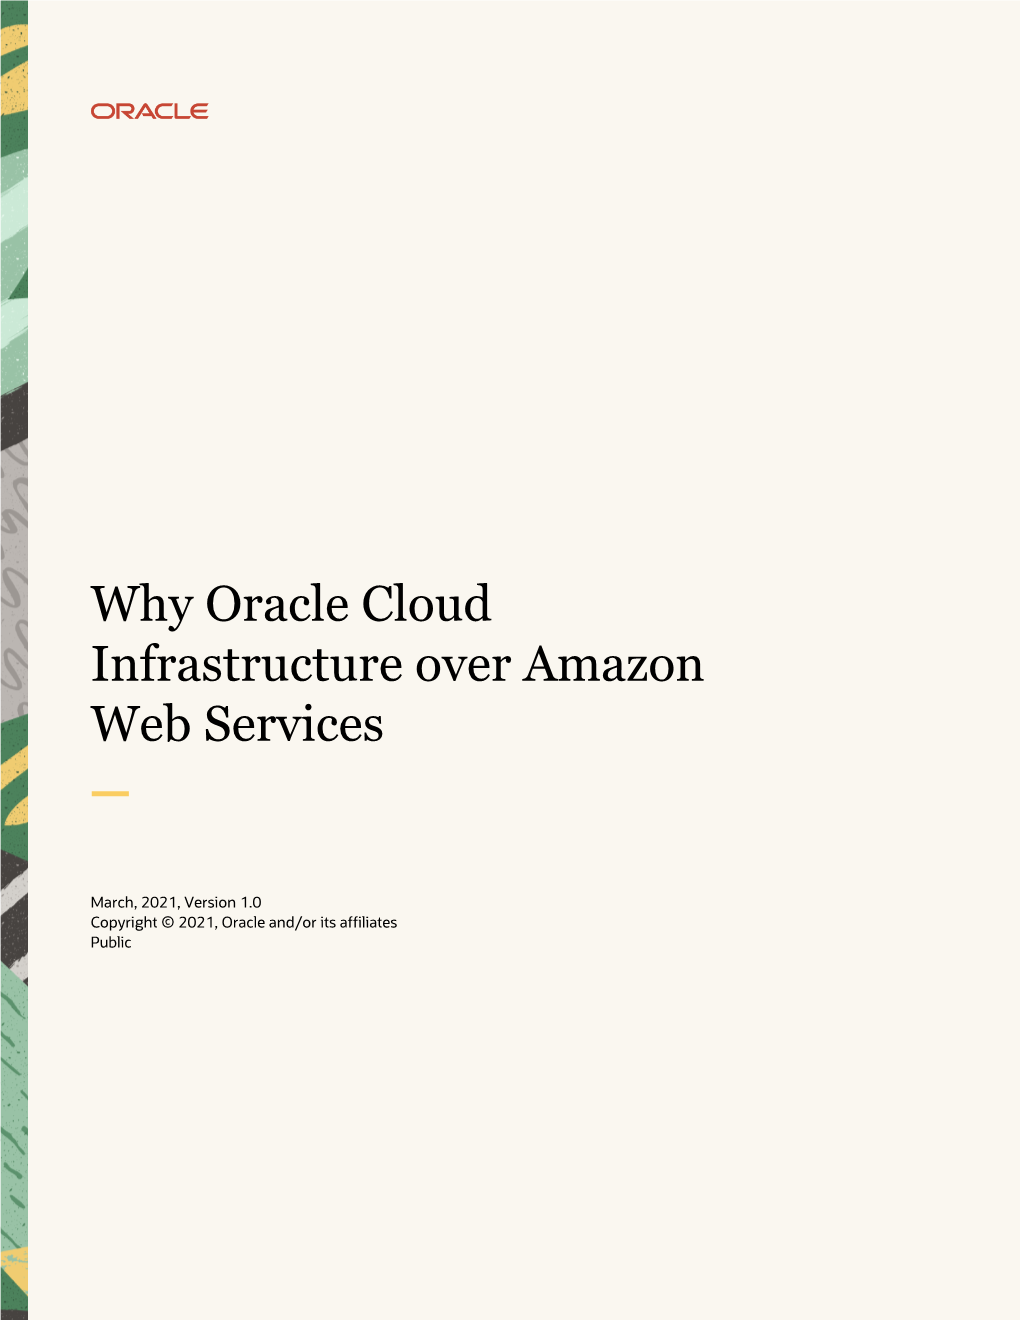 Why Oracle Cloud Infrastructure Over Amazon Web Services